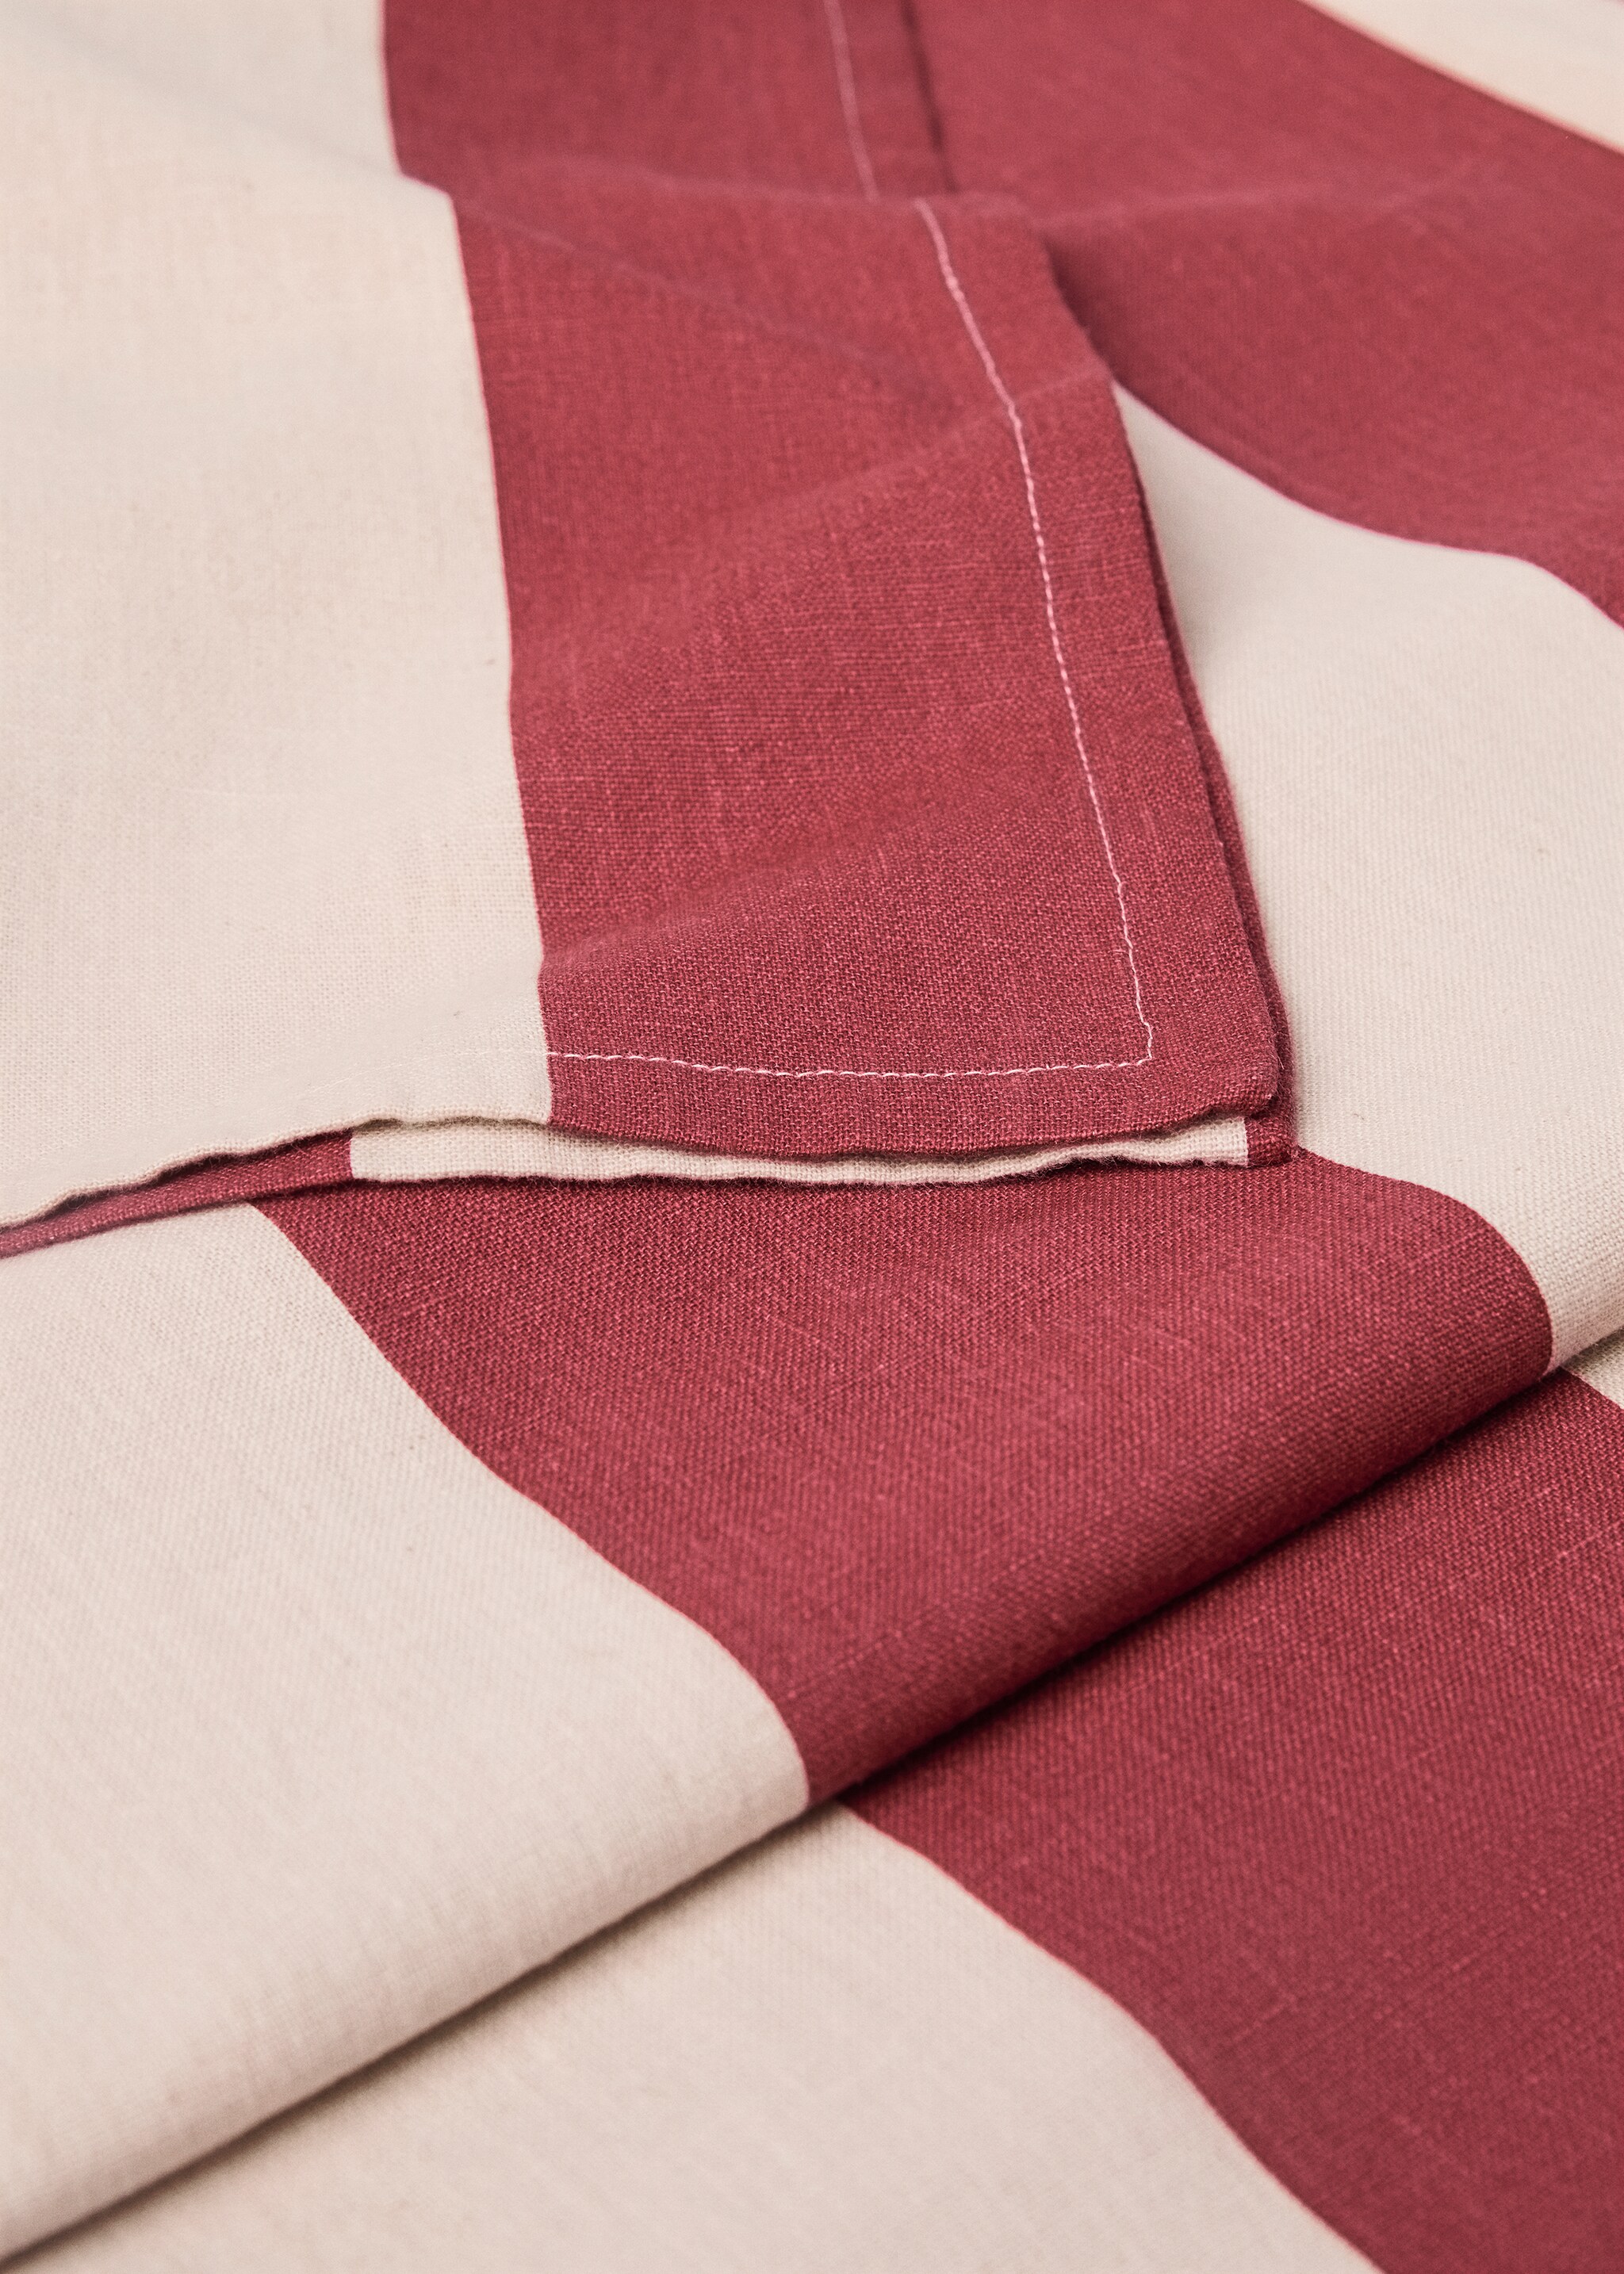 Striped cotton linen tablecloth 170x250cm - Details of the article 1